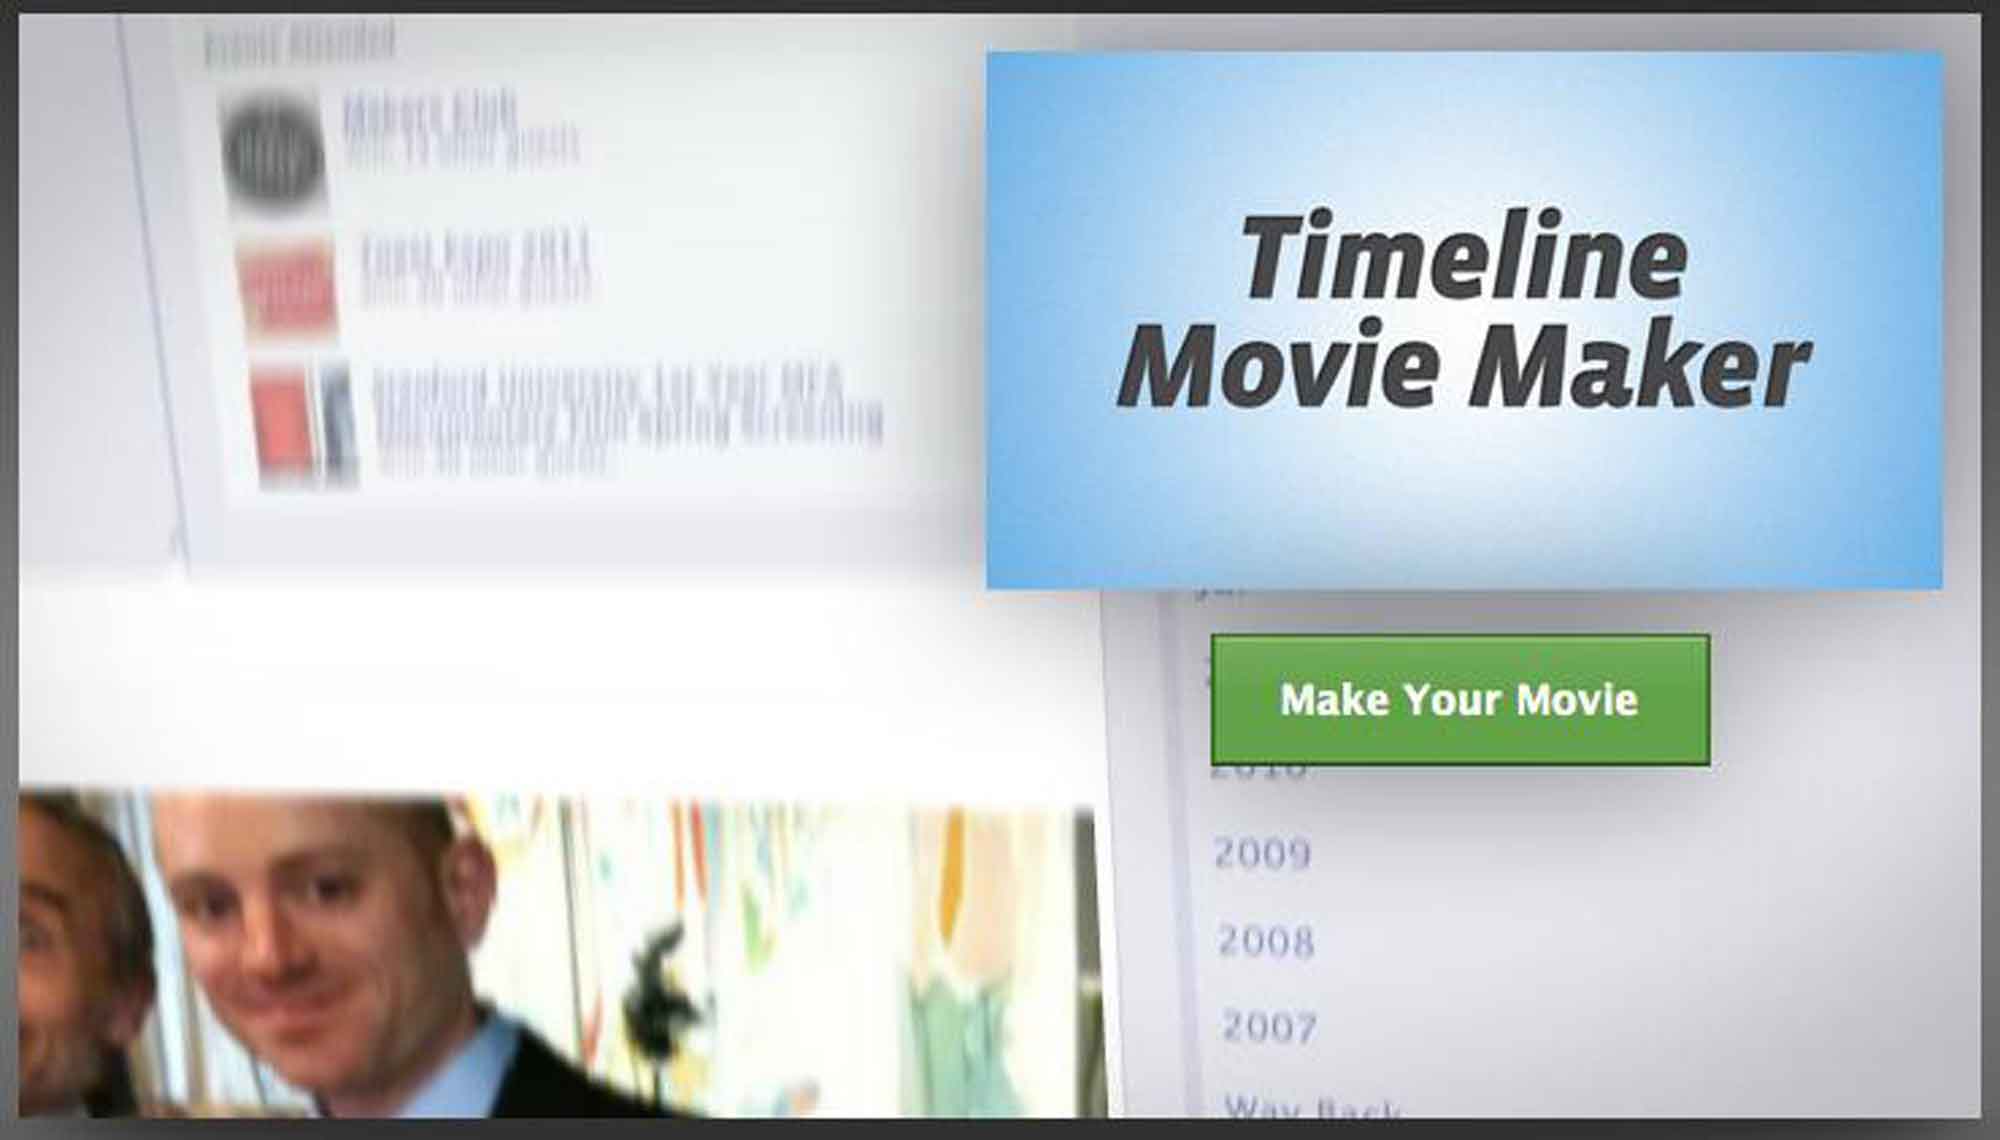 How To Turn Your Facebook Timeline Into An Awesome Movie With Timeline Movie Maker